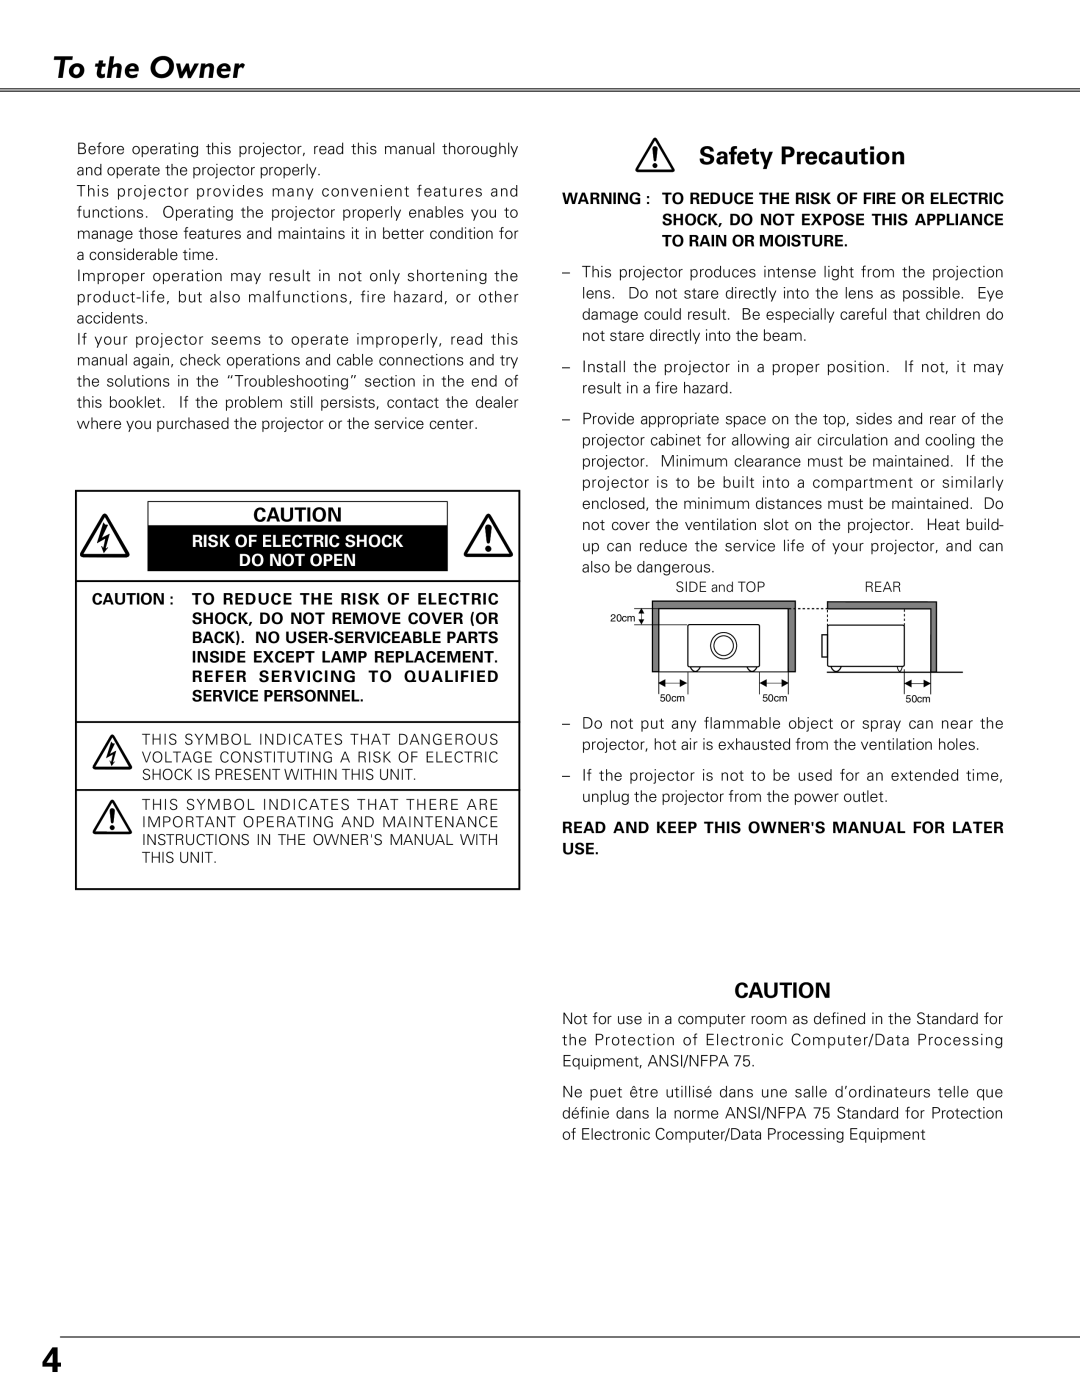 Eiki LC-SB21 owner manual To the Owner, Safety Precaution, Risk Of Electric Shock Do Not Open 